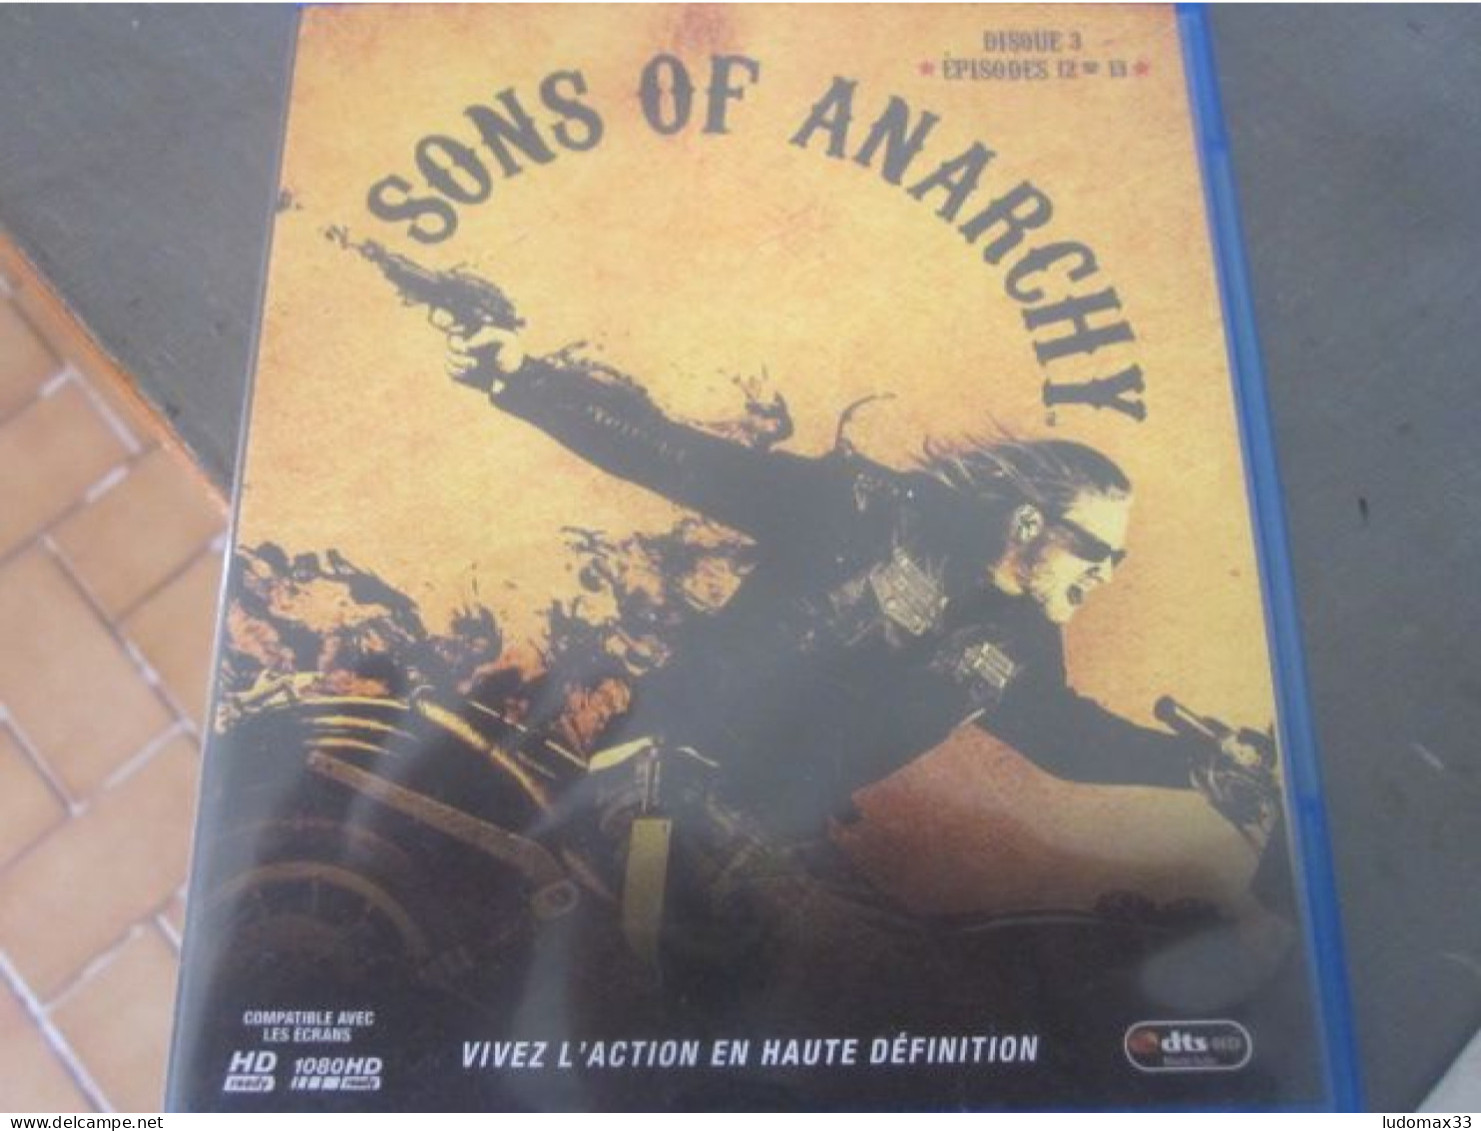 Sons Of Anarchy Disque 3 Episodes 12 13 - Action, Aventure